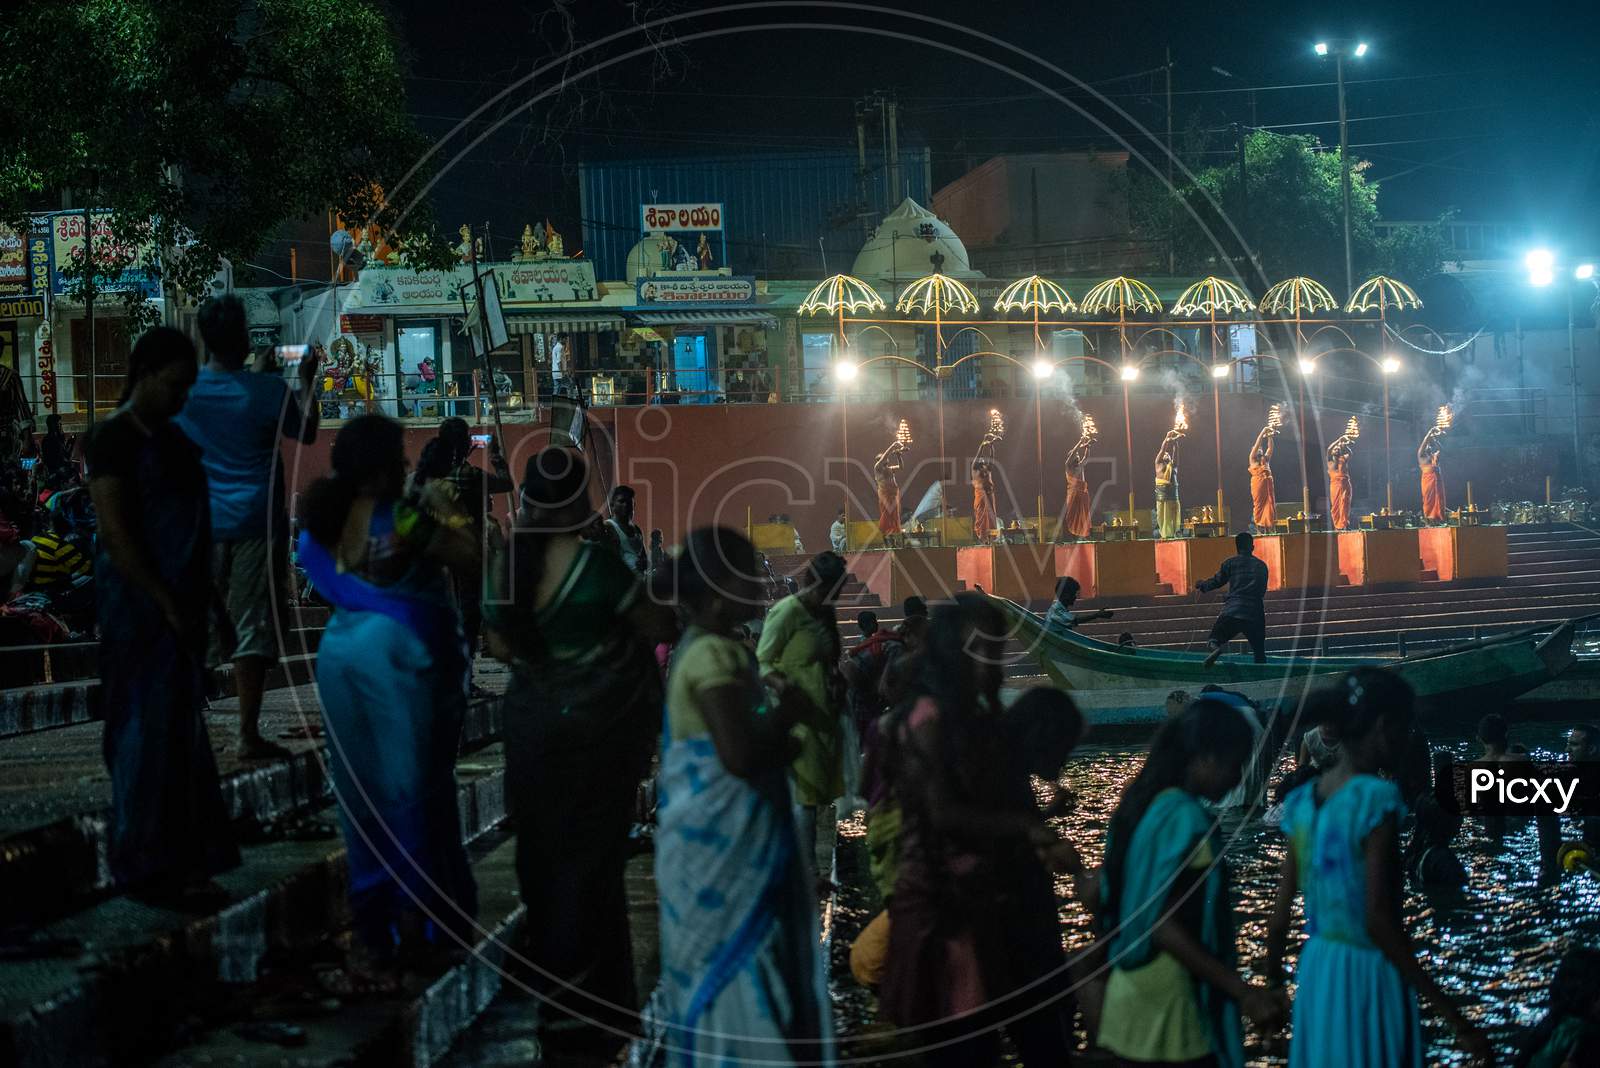 People bath in River Godavari during Harathi is being offered